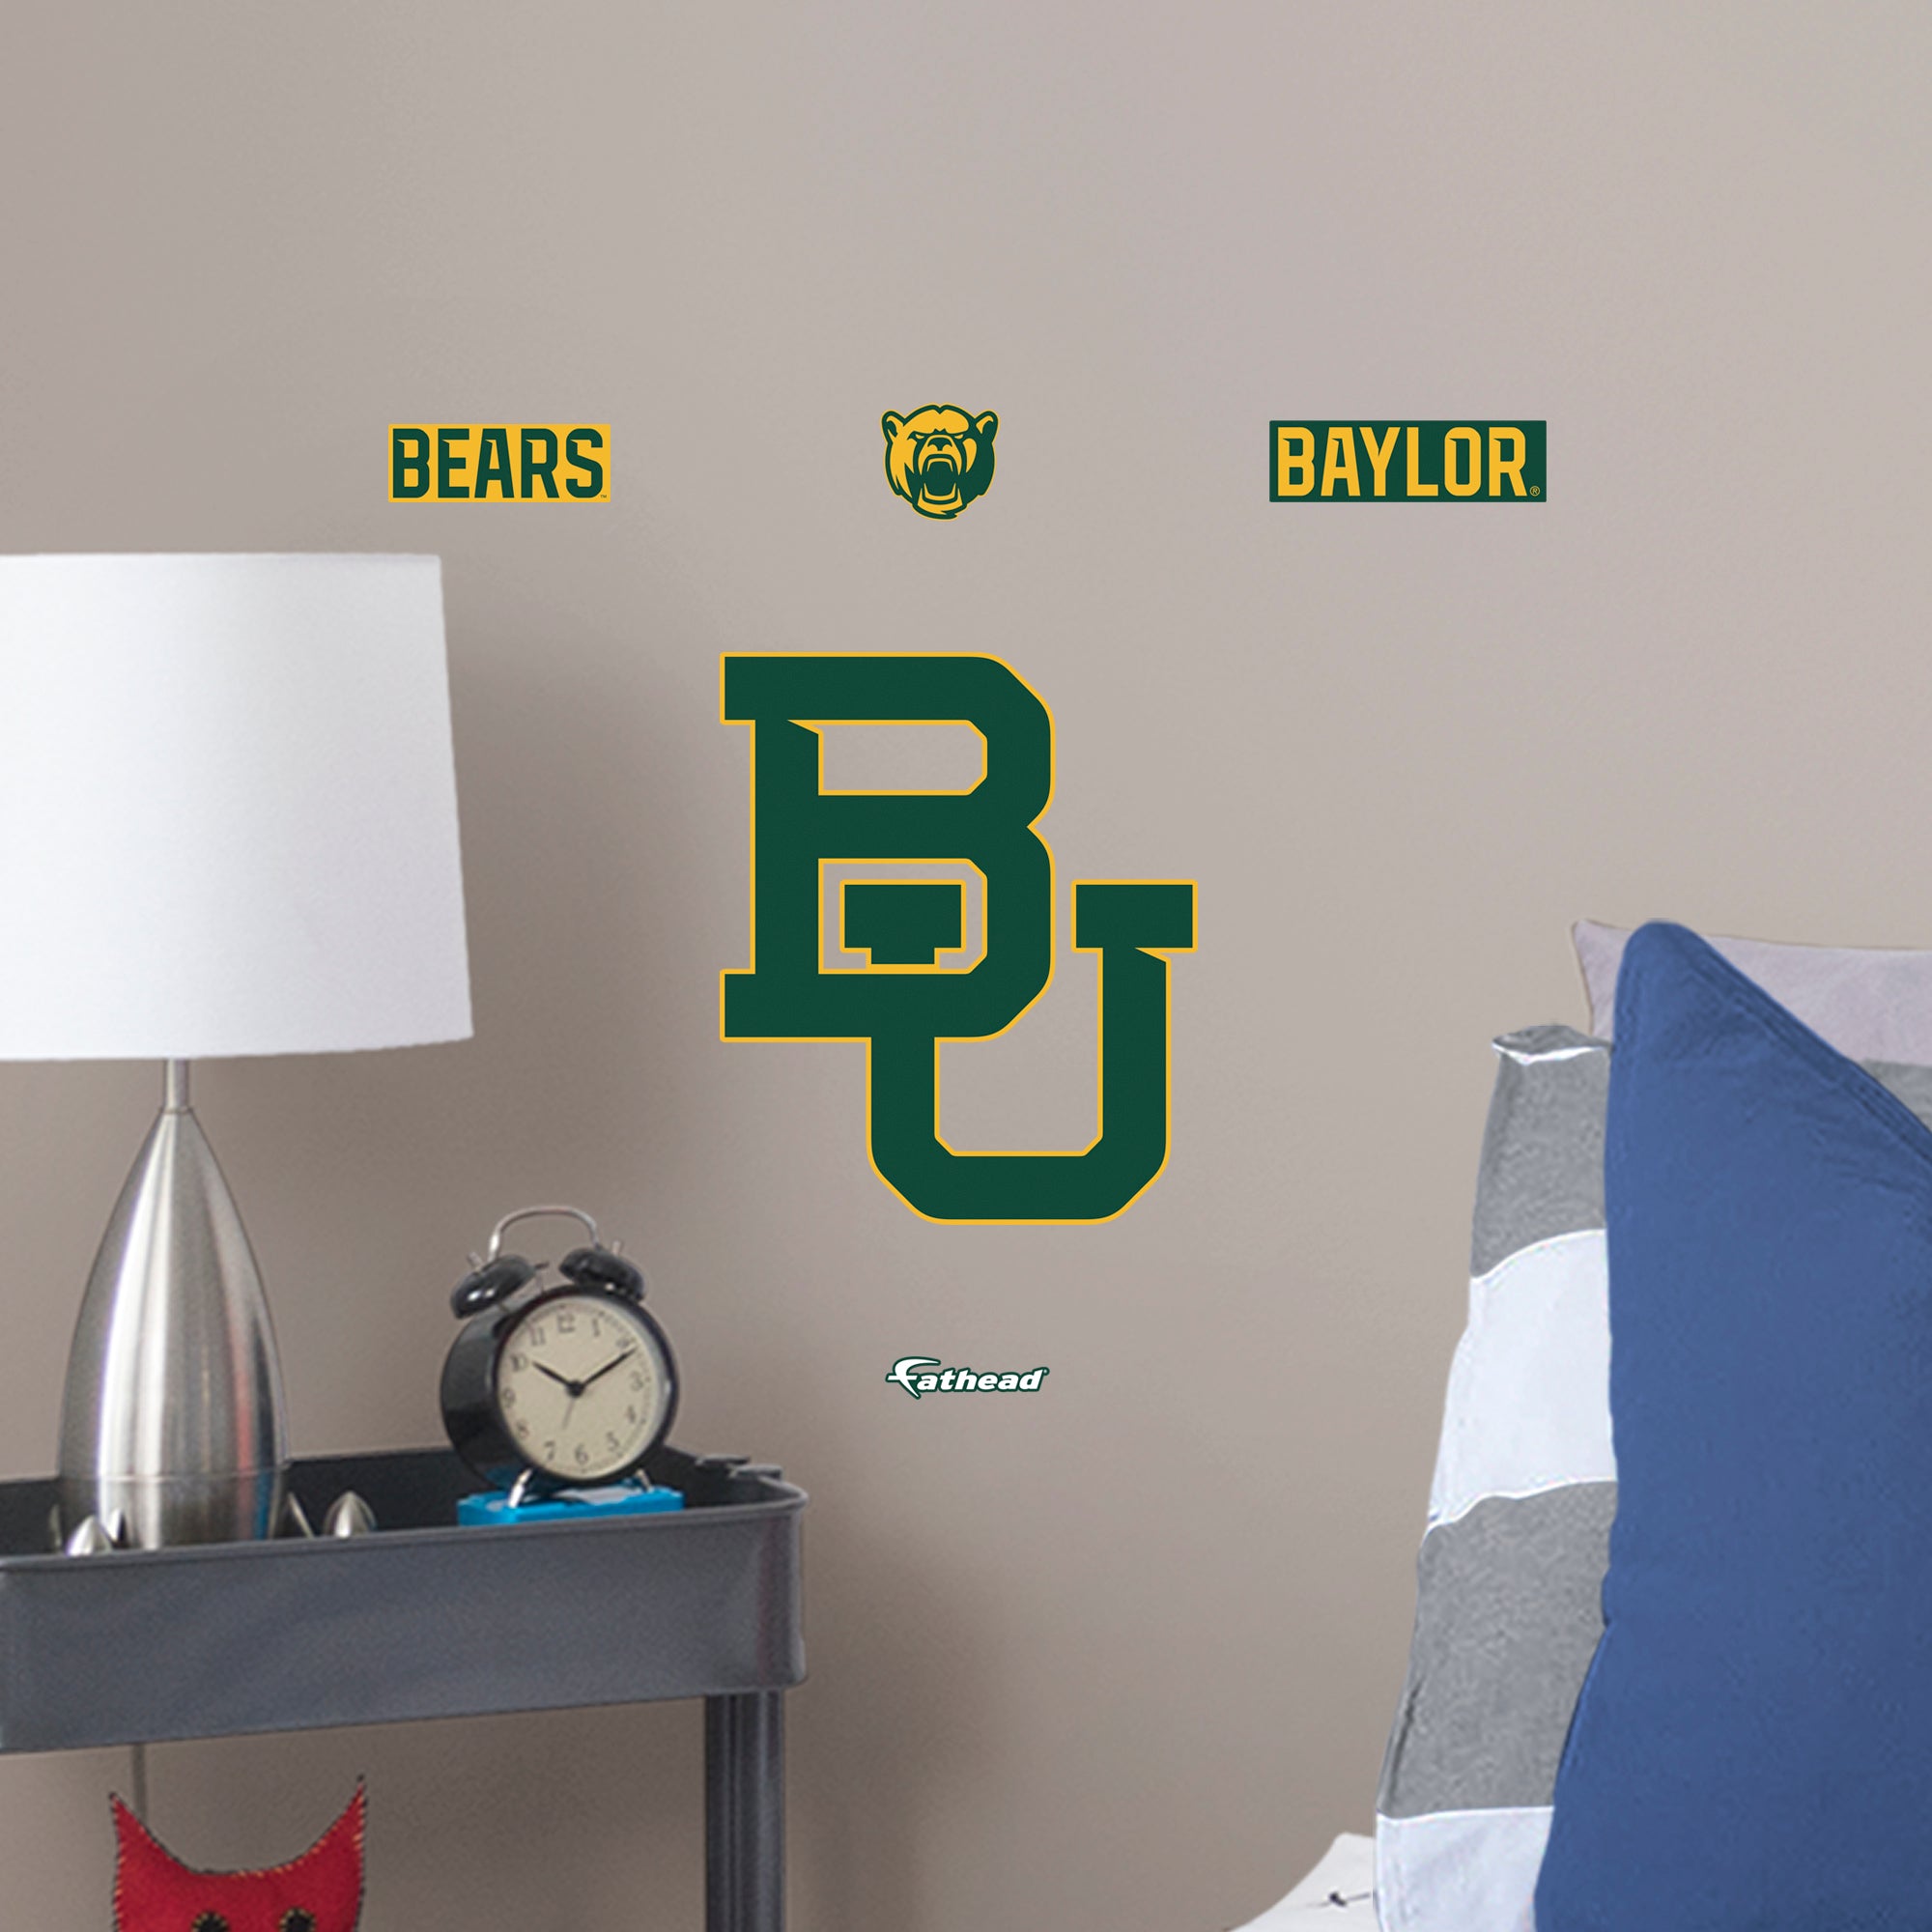 Baylor Bears 2020 POD Teammate Logo - Officially Licensed NCAA Removable Wall Decal Large by Fathead | Vinyl